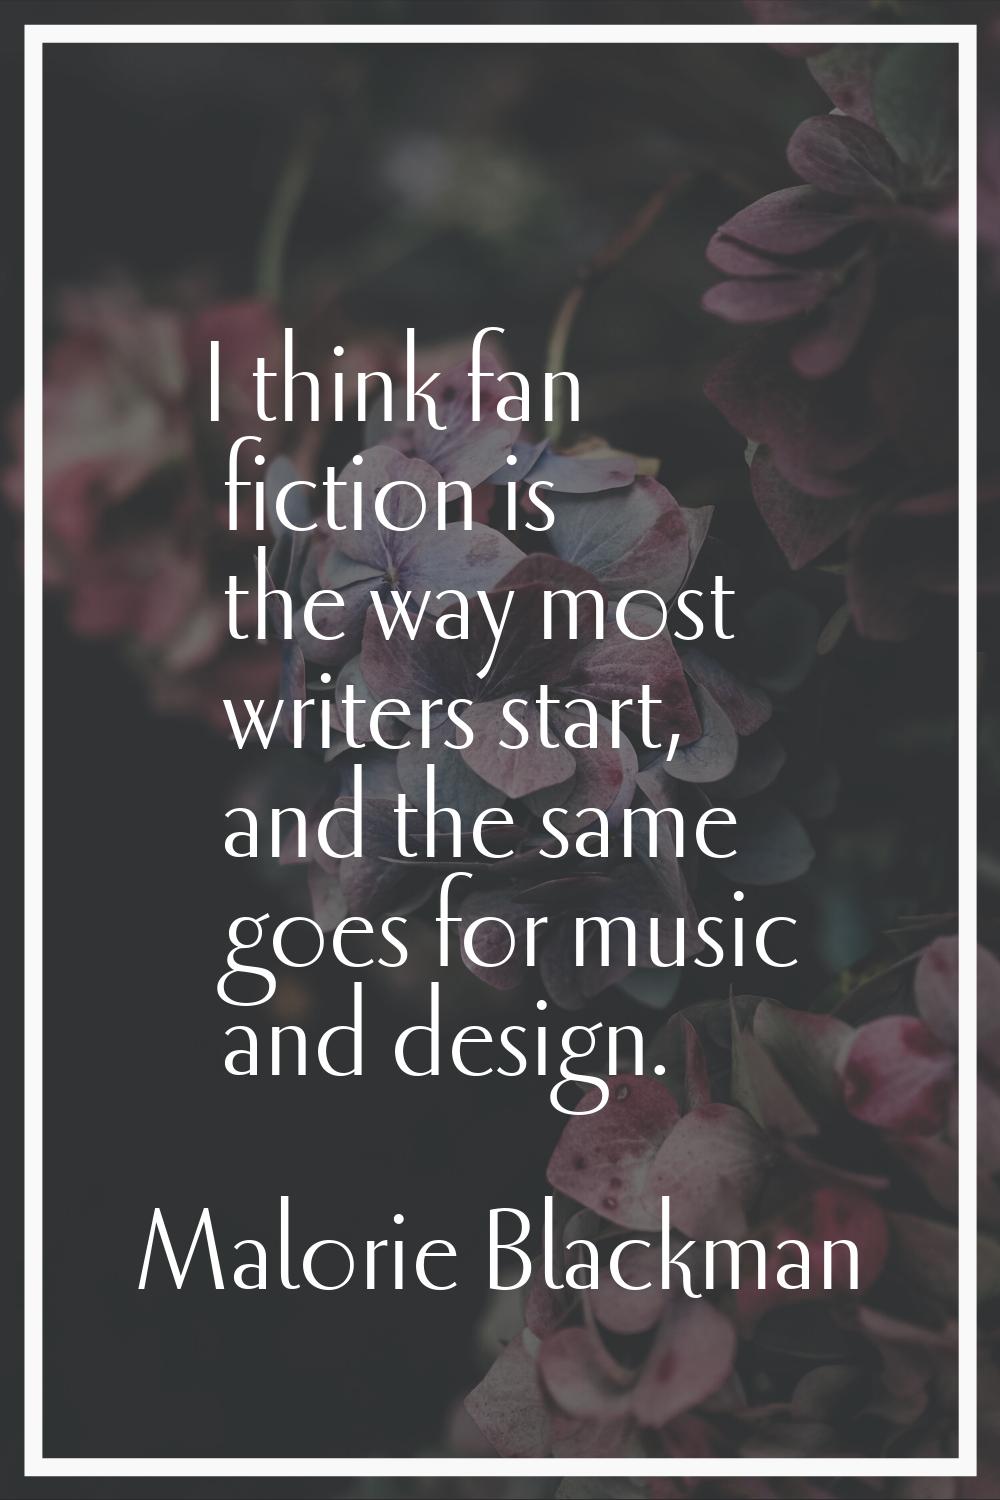 I think fan fiction is the way most writers start, and the same goes for music and design.